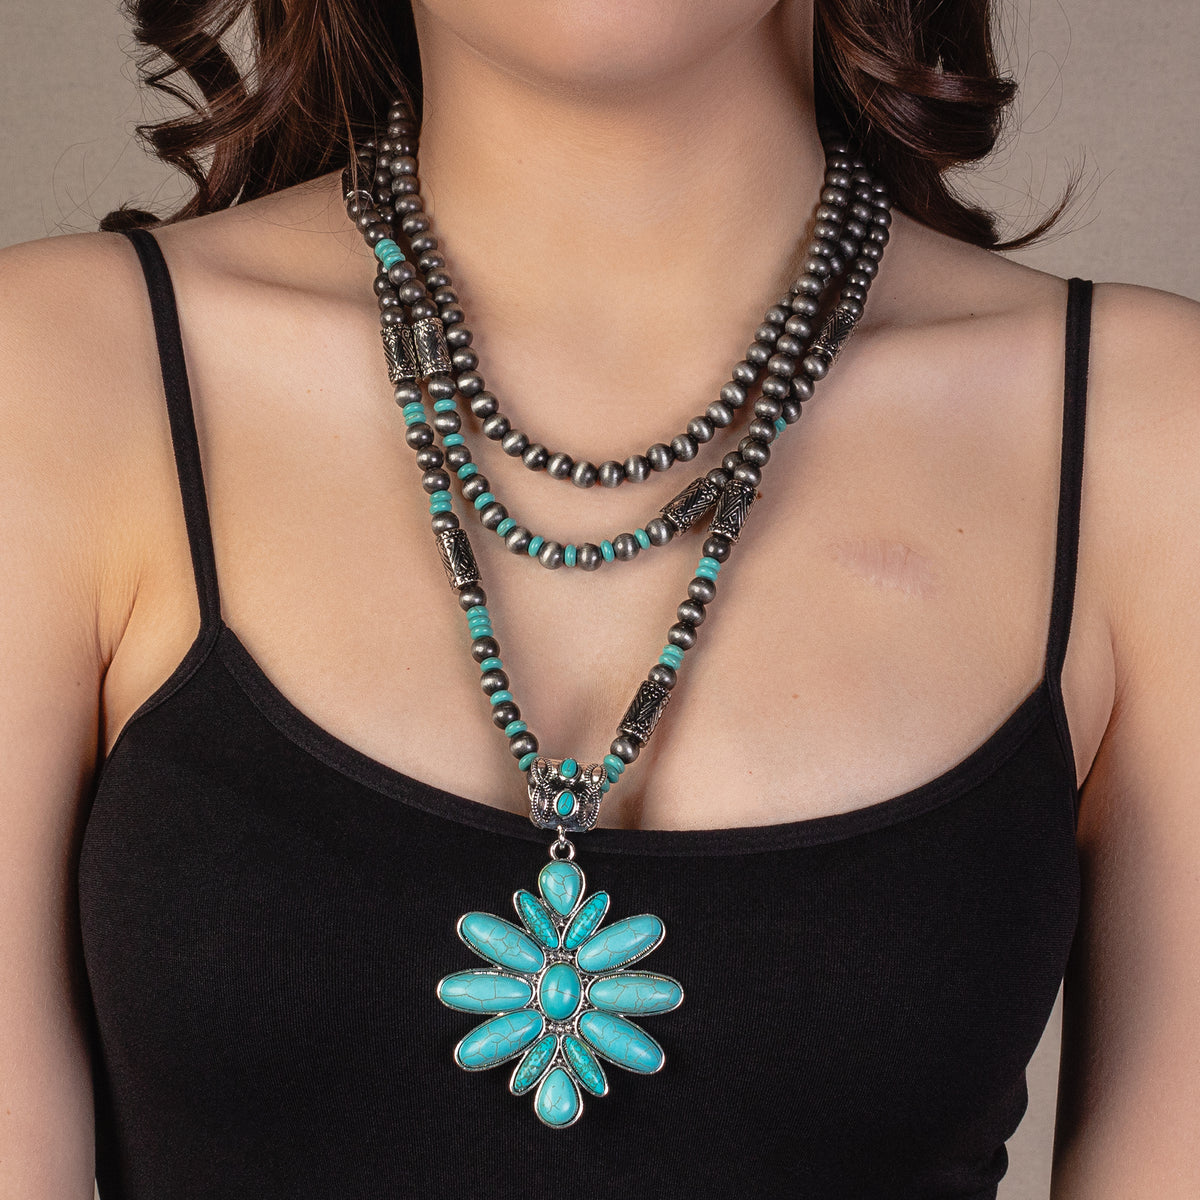 72897 - Squash Blossom Necklace - Turquoise & Silver